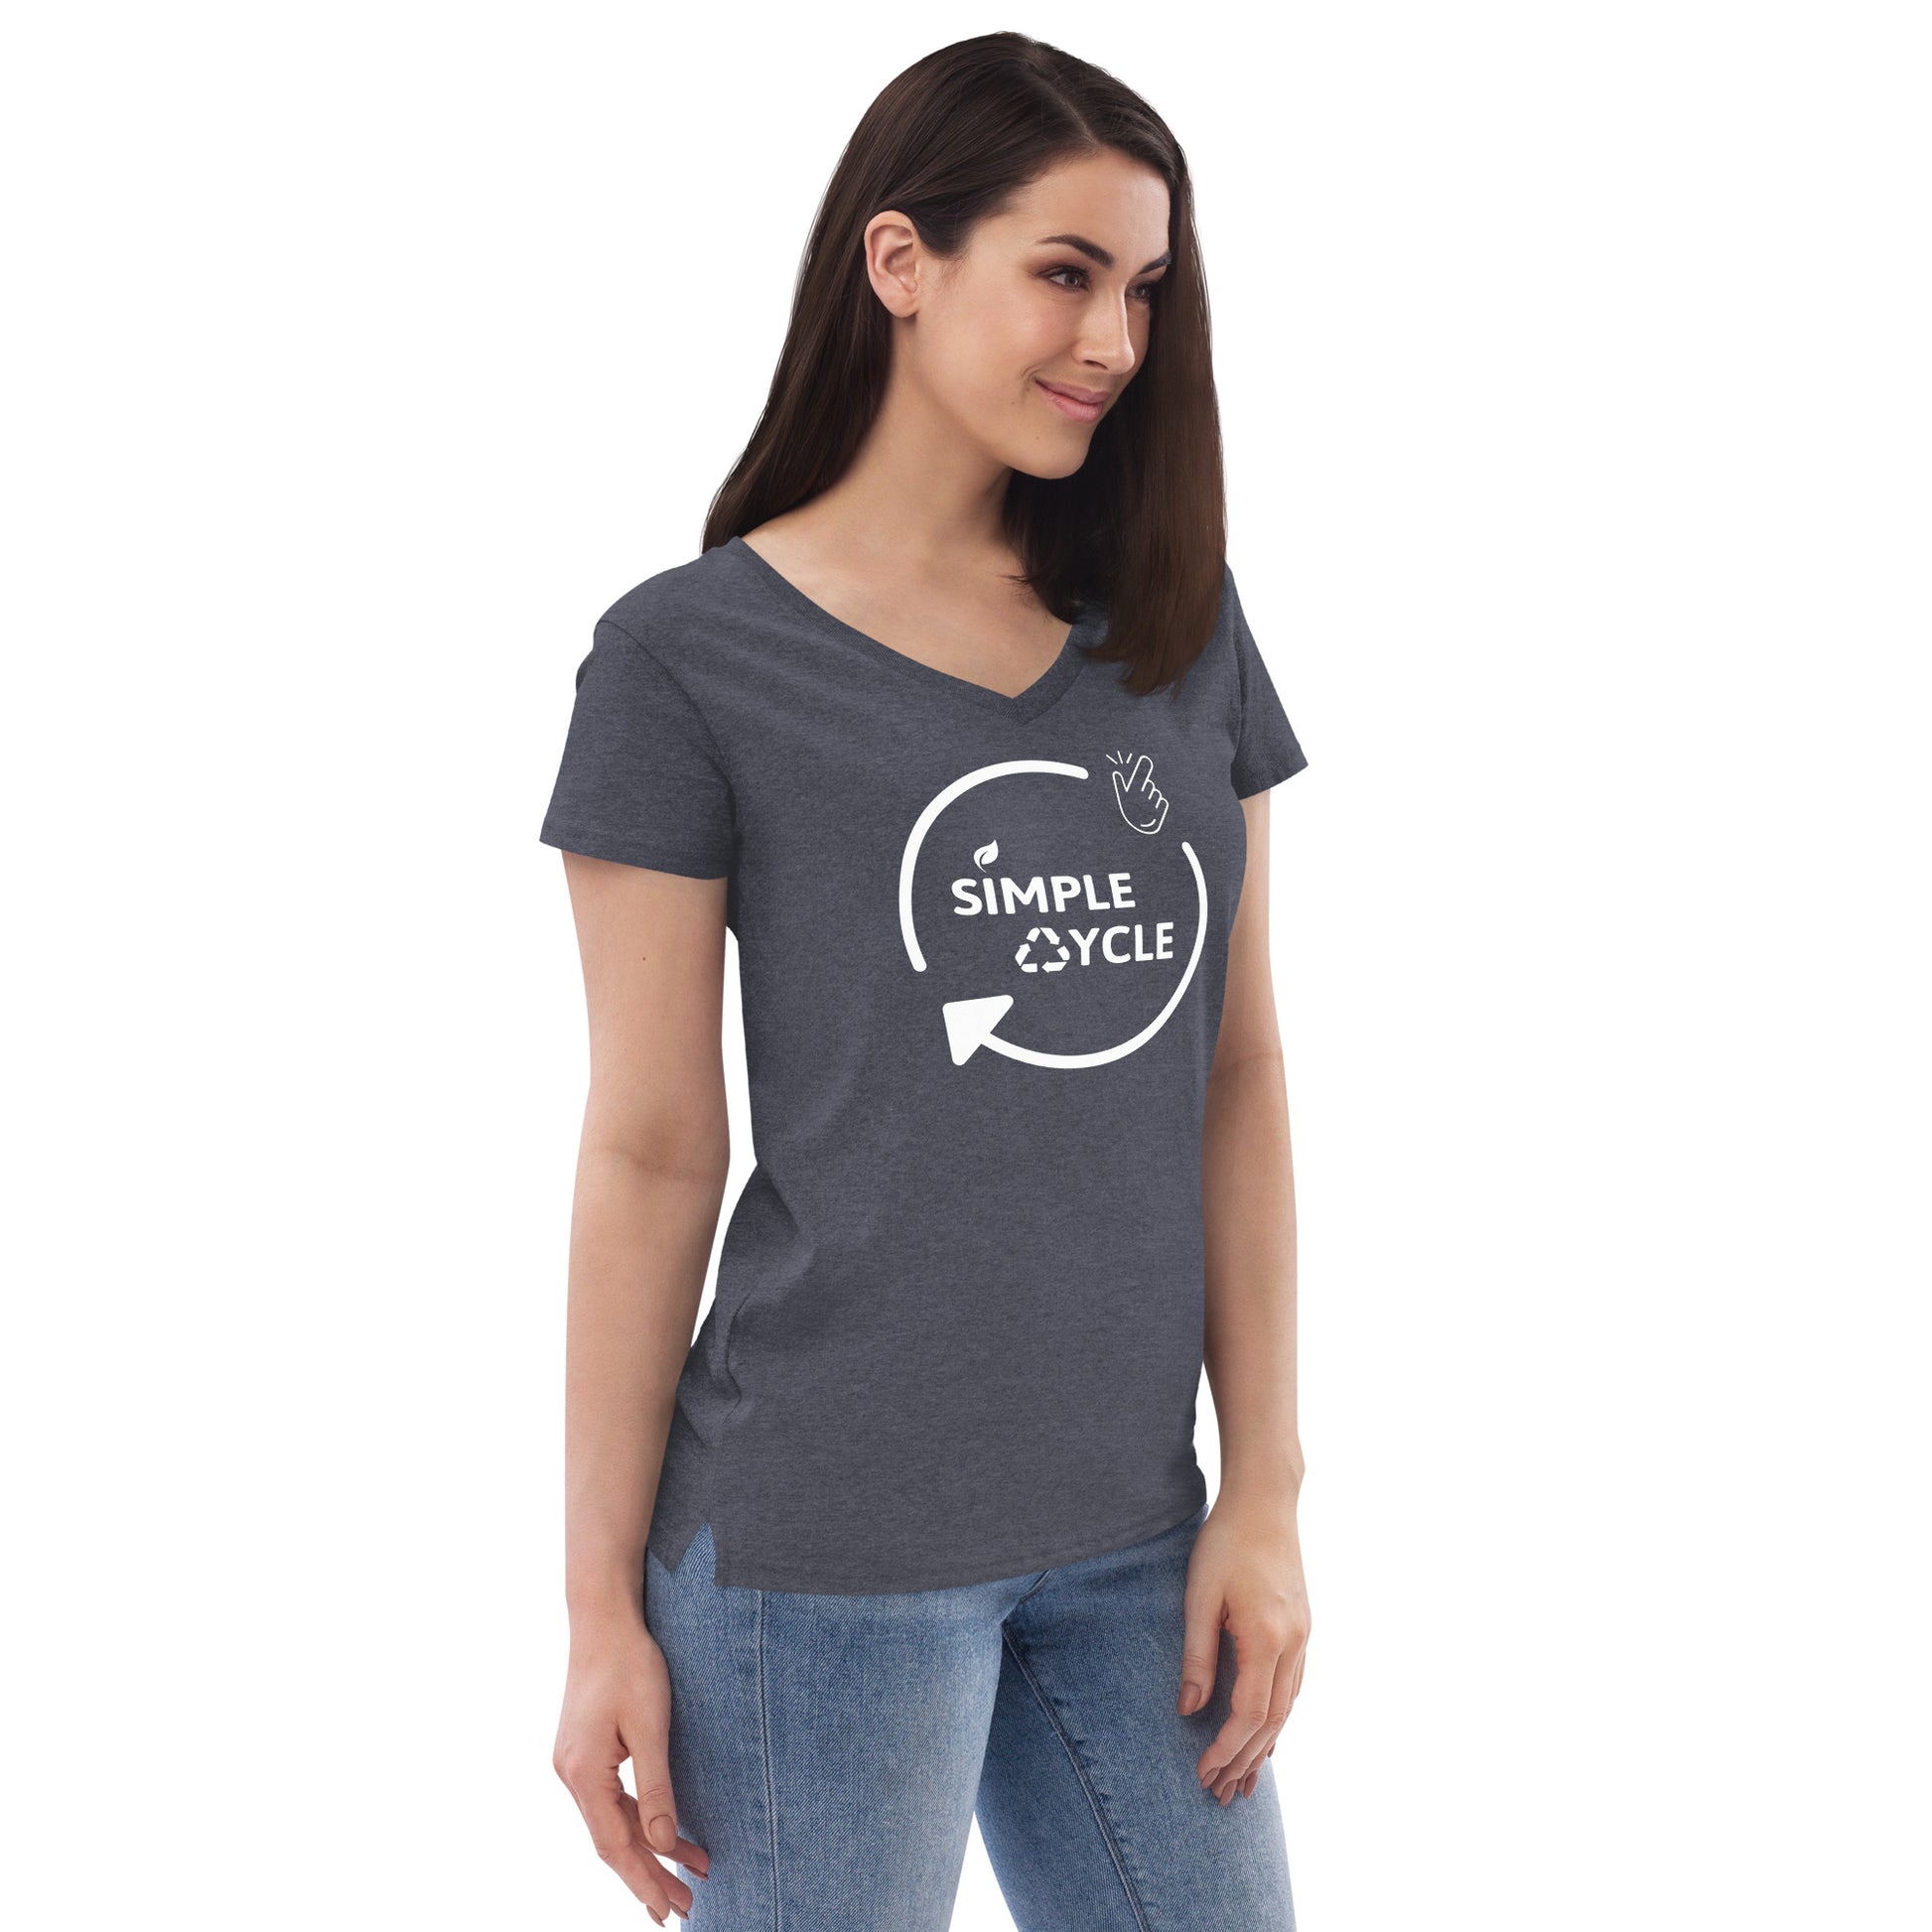 SimpleCycle Women’s Recycled V-Neck T-Shirt heather navy front side view